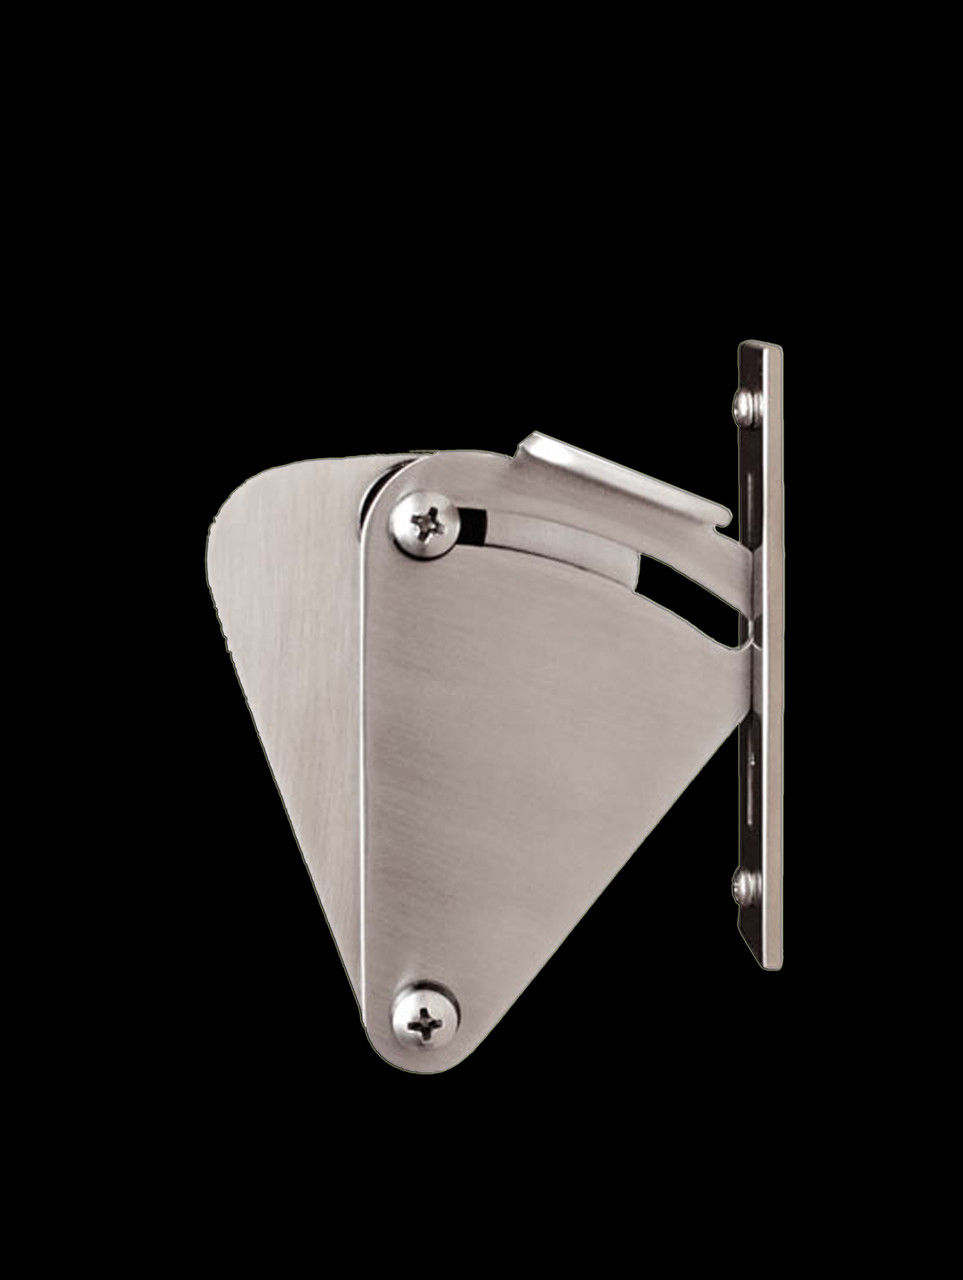 Circa-WT Series STRONGAR Contemporary Stainless Steel Sliding Barn Door Hardware for Wood Doors/Polished Chrome Finish 6 Rail Length